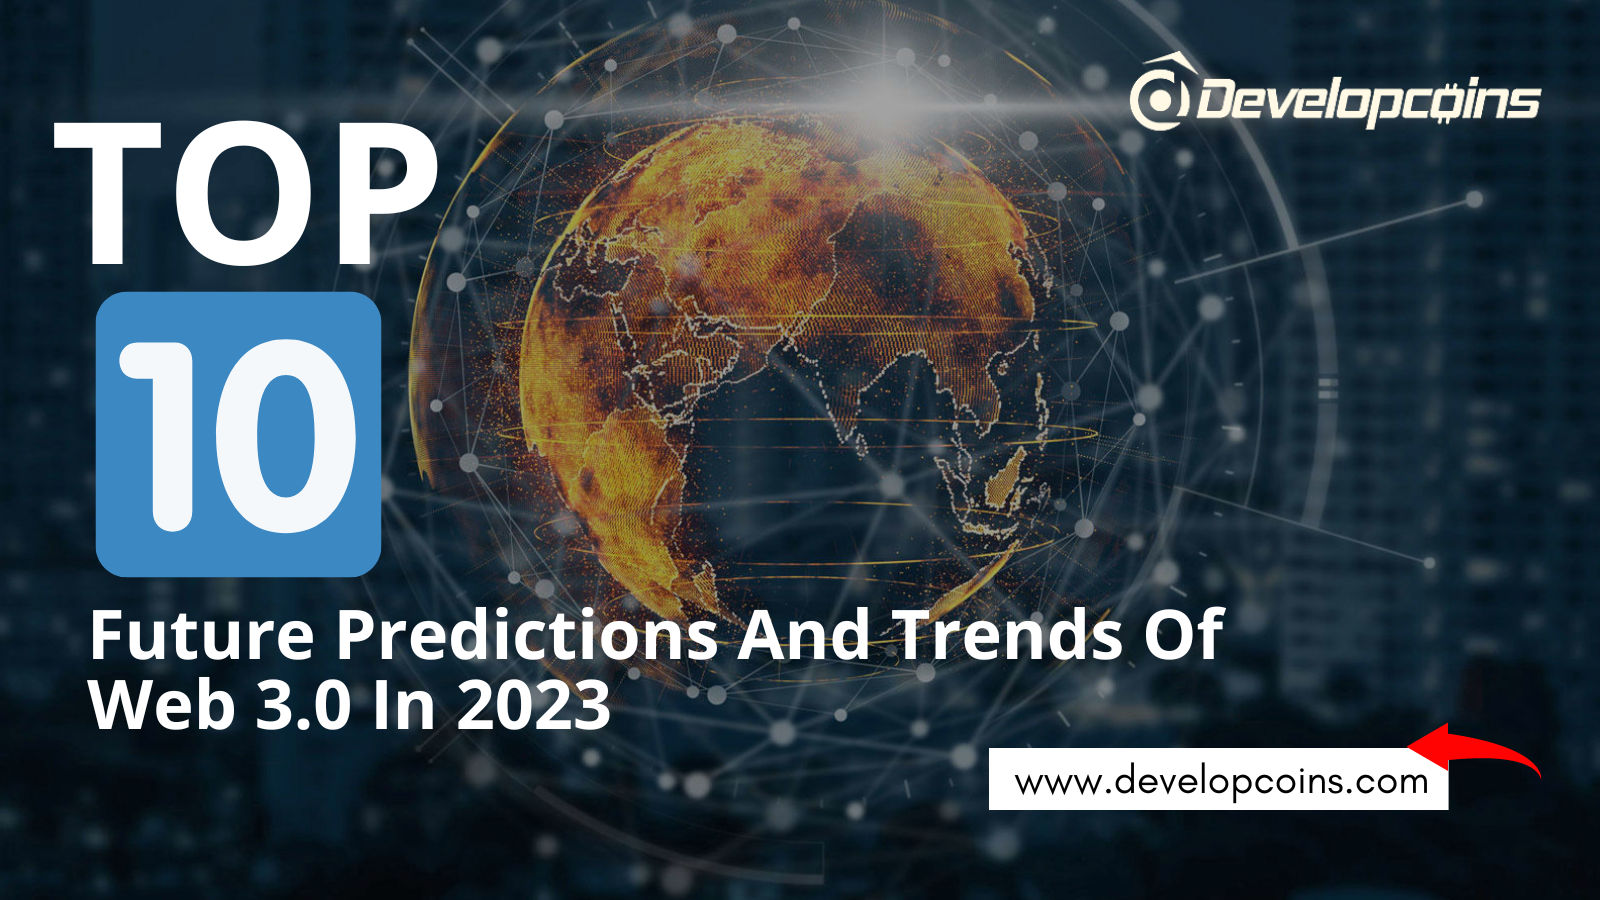 Top 10 Future Predictions And Trends Of Web 3.0 In 2023